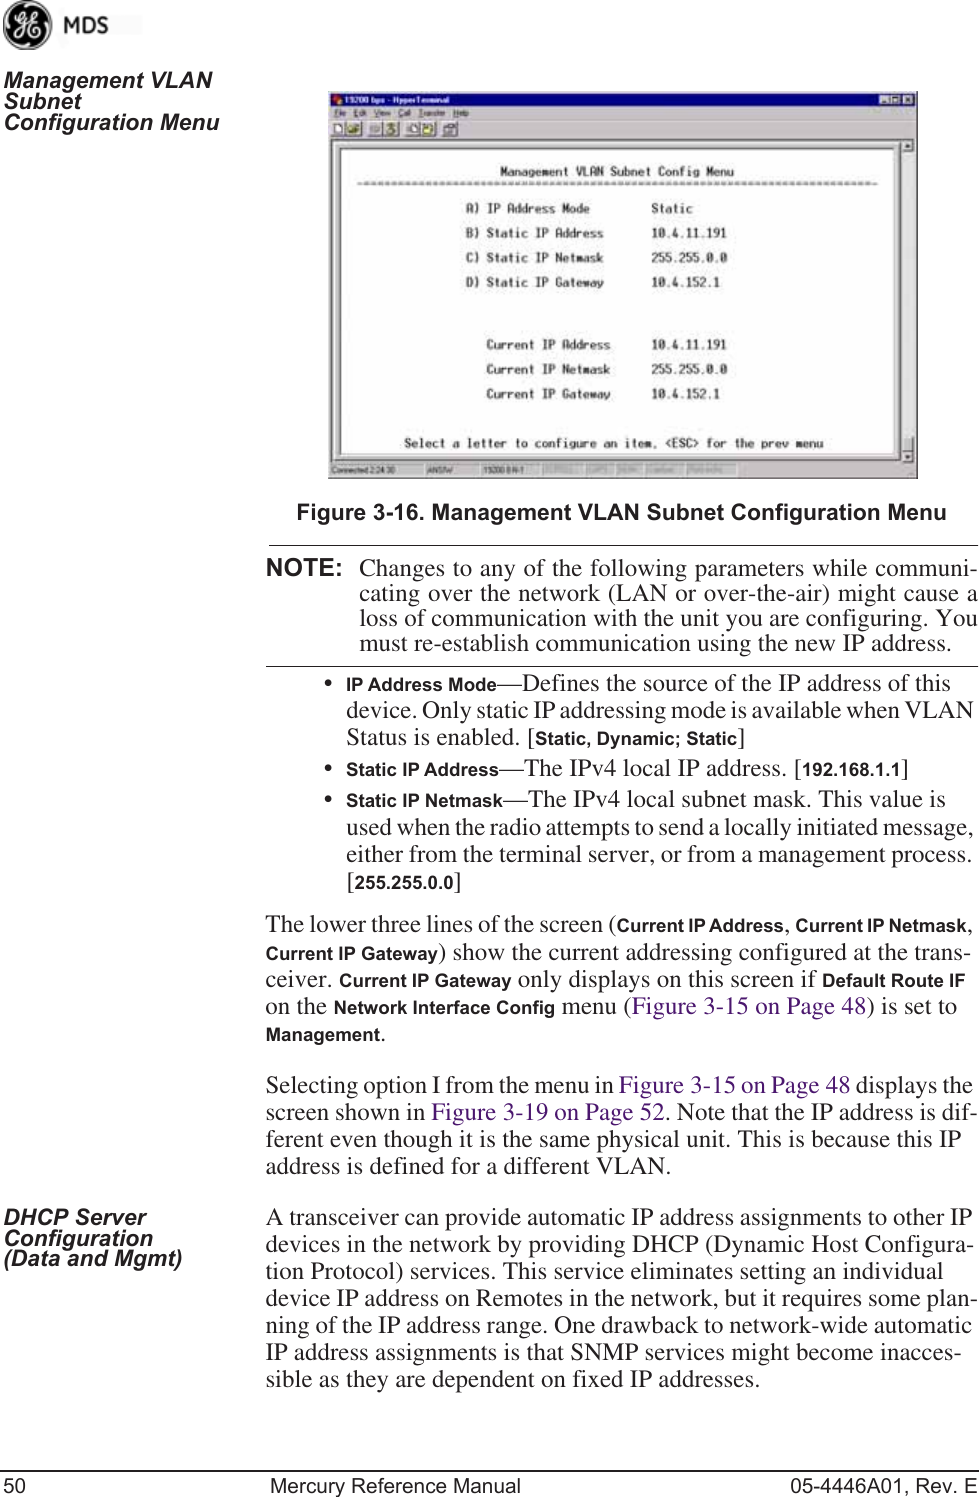 50 Mercury Reference Manual 05-4446A01, Rev. EManagement VLAN Subnet Configuration MenuInvisible place holderFigure 3-16. Management VLAN Subnet Configuration MenuNOTE: Changes to any of the following parameters while communi-cating over the network (LAN or over-the-air) might cause aloss of communication with the unit you are configuring. Youmust re-establish communication using the new IP address.•IP Address Mode—Defines the source of the IP address of this device. Only static IP addressing mode is available when VLAN Status is enabled. [Static, Dynamic; Static]•Static IP Address—The IPv4 local IP address. [192.168.1.1]•Static IP Netmask—The IPv4 local subnet mask. This value is used when the radio attempts to send a locally initiated message, either from the terminal server, or from a management process. [255.255.0.0]The lower three lines of the screen (Current IP Address, Current IP Netmask, Current IP Gateway) show the current addressing configured at the trans-ceiver. Current IP Gateway only displays on this screen if Default Route IF on the Network Interface Config menu (Figure 3-15 on Page 48) is set to Management.Selecting option I from the menu in Figure 3-15 on Page 48 displays the screen shown in Figure 3-19 on Page 52. Note that the IP address is dif-ferent even though it is the same physical unit. This is because this IP address is defined for a different VLAN.DHCP Server Configuration (Data and Mgmt)A transceiver can provide automatic IP address assignments to other IP devices in the network by providing DHCP (Dynamic Host Configura-tion Protocol) services. This service eliminates setting an individual device IP address on Remotes in the network, but it requires some plan-ning of the IP address range. One drawback to network-wide automatic IP address assignments is that SNMP services might become inacces-sible as they are dependent on fixed IP addresses.